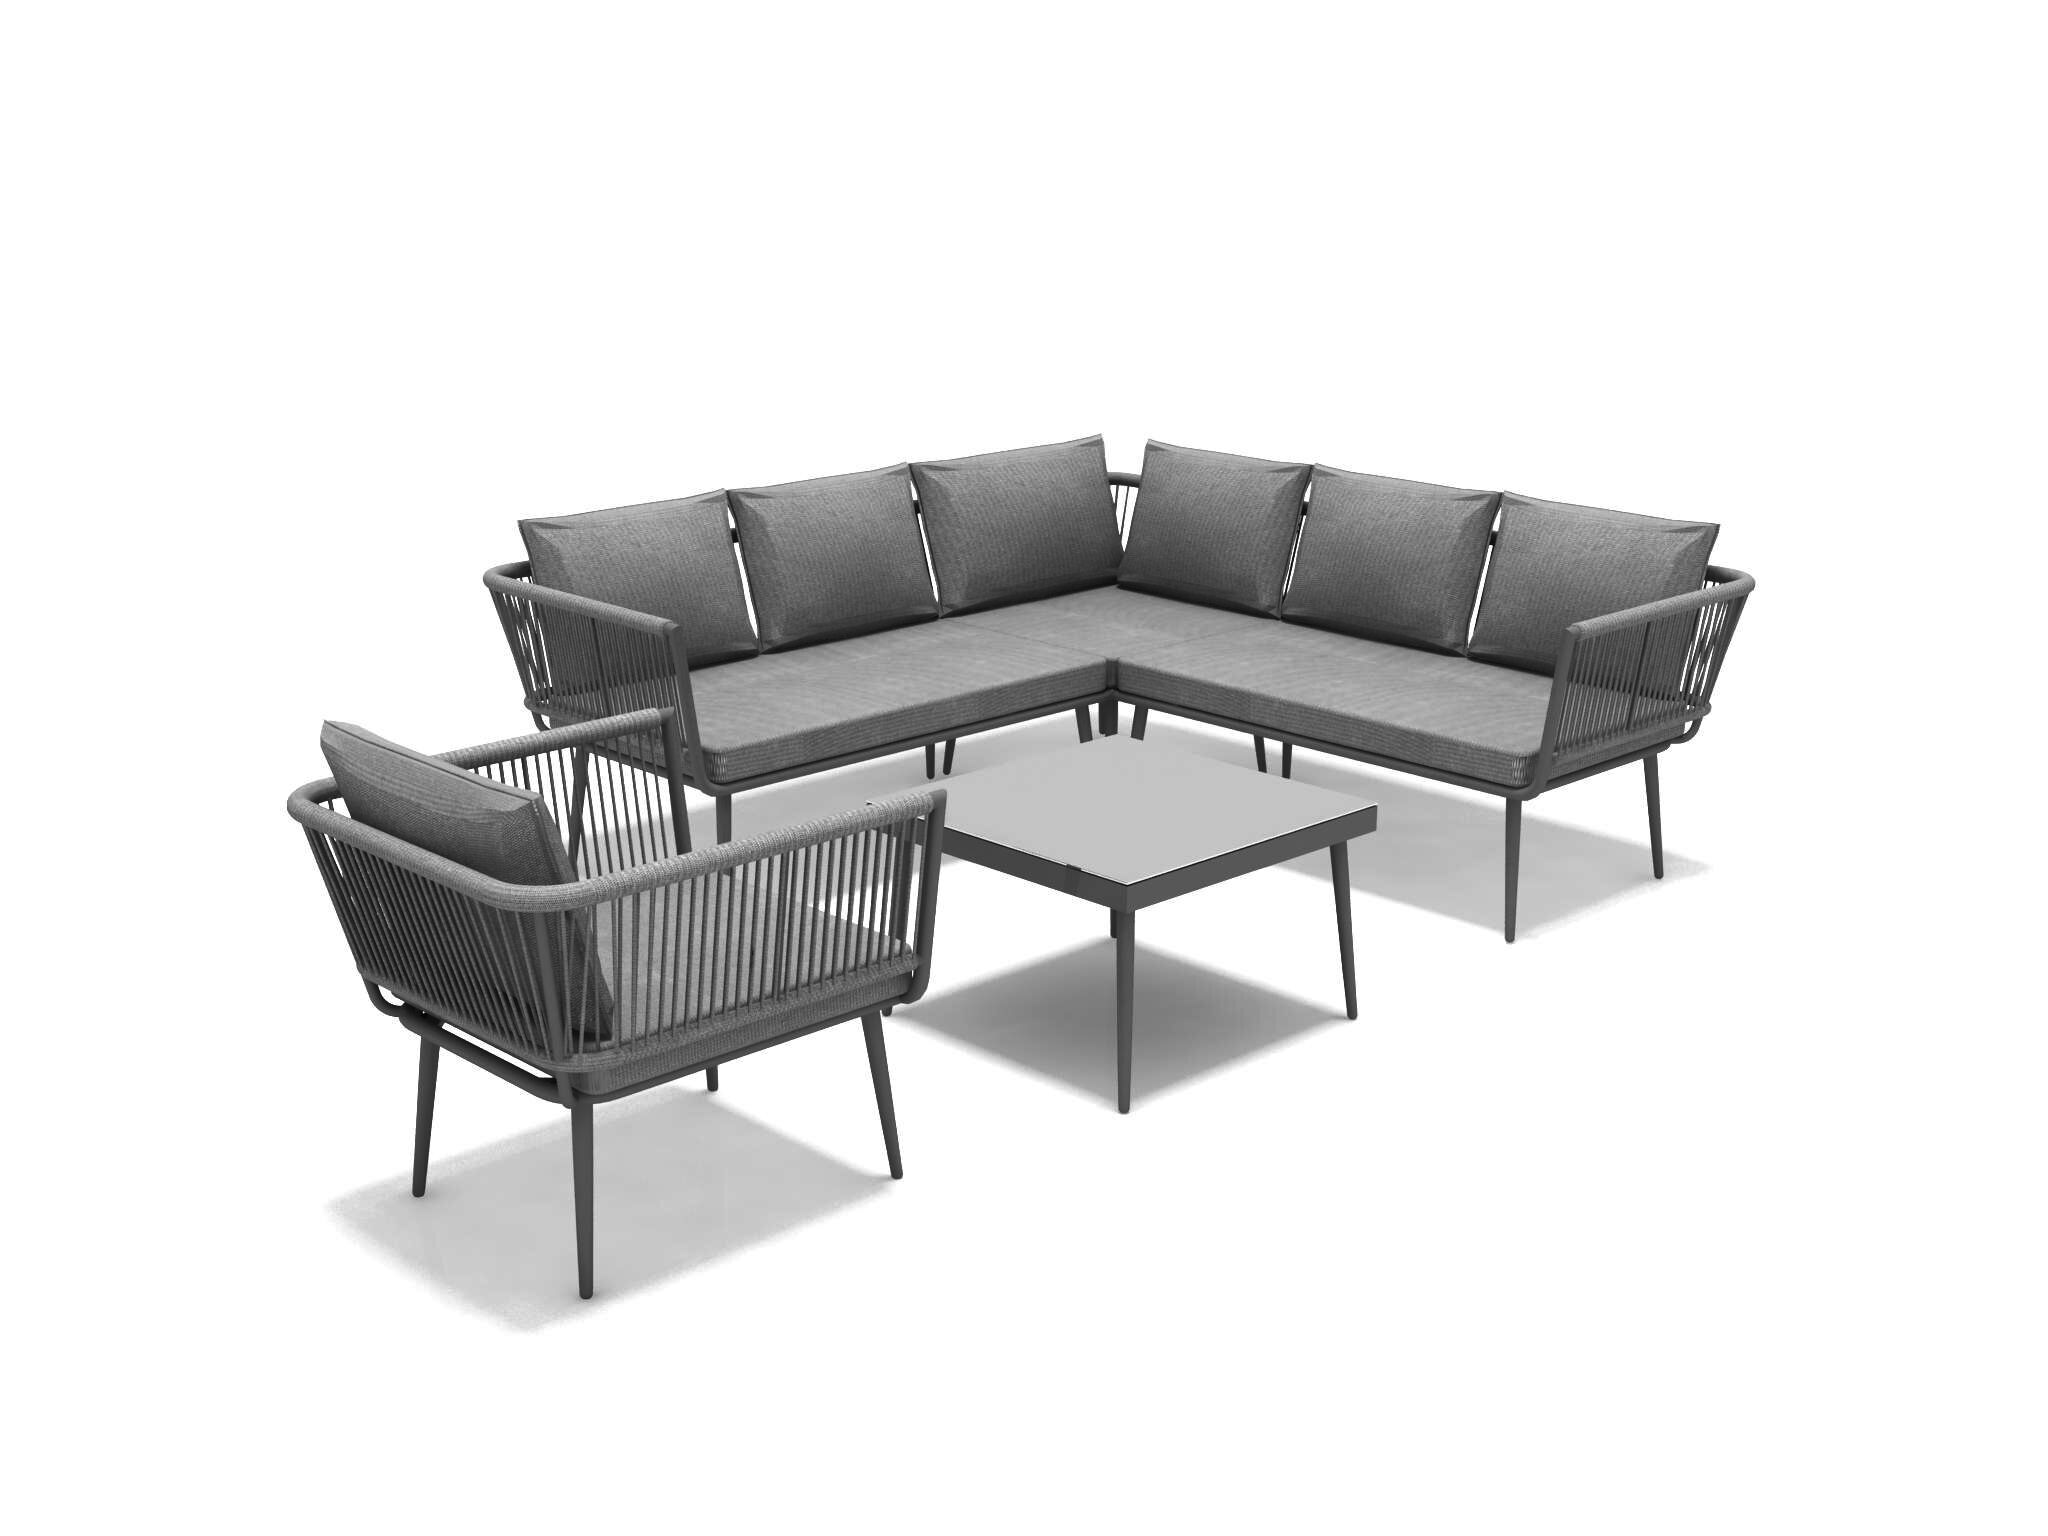 New Drawing Of Sofa Set Combination  From Jacrea Outdoor Funiture Co., Ltd.